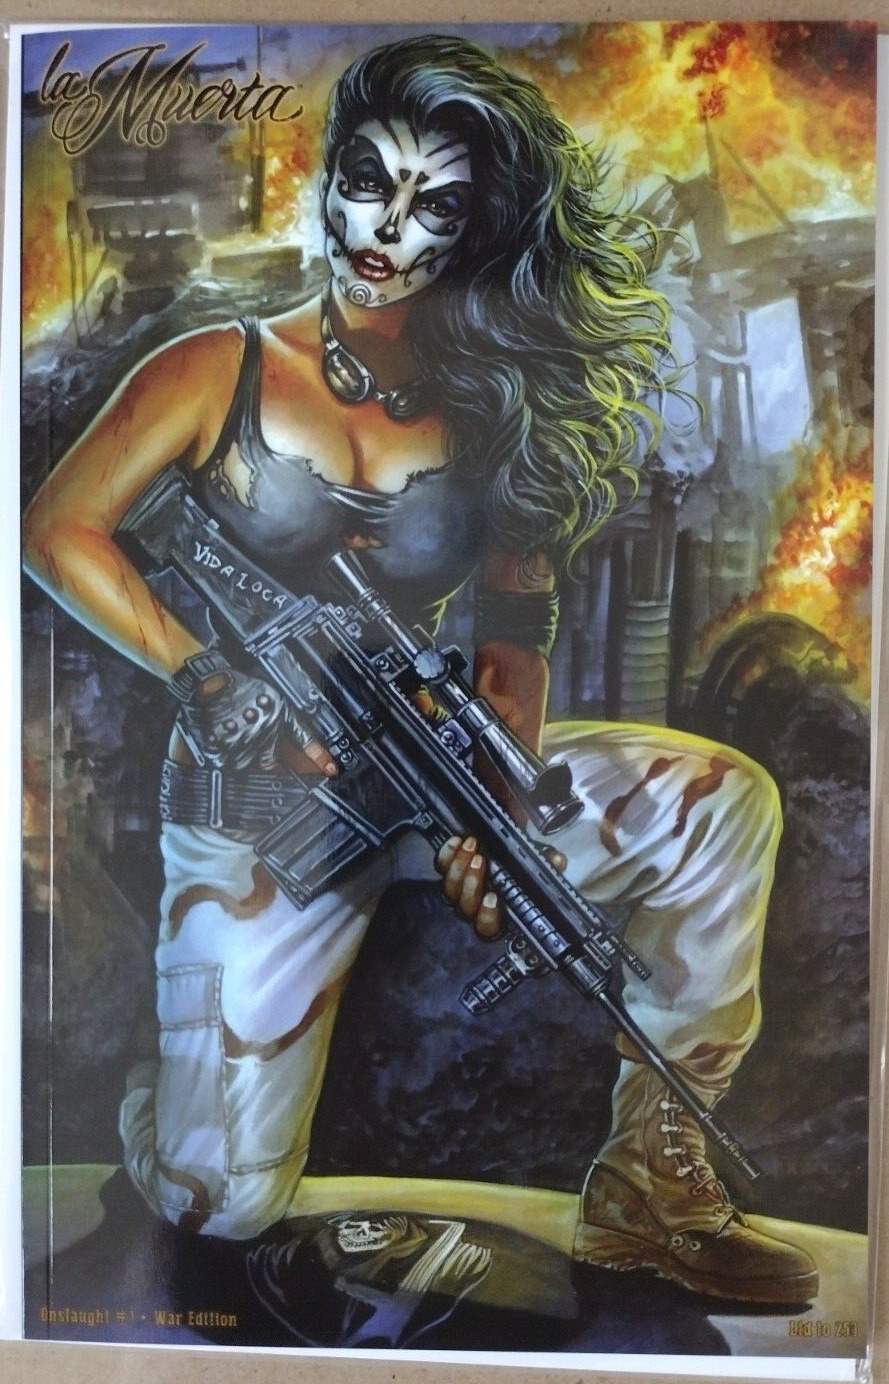 La Muerta Onslaught #1 War Edition, Ltd to 250, 48 pages